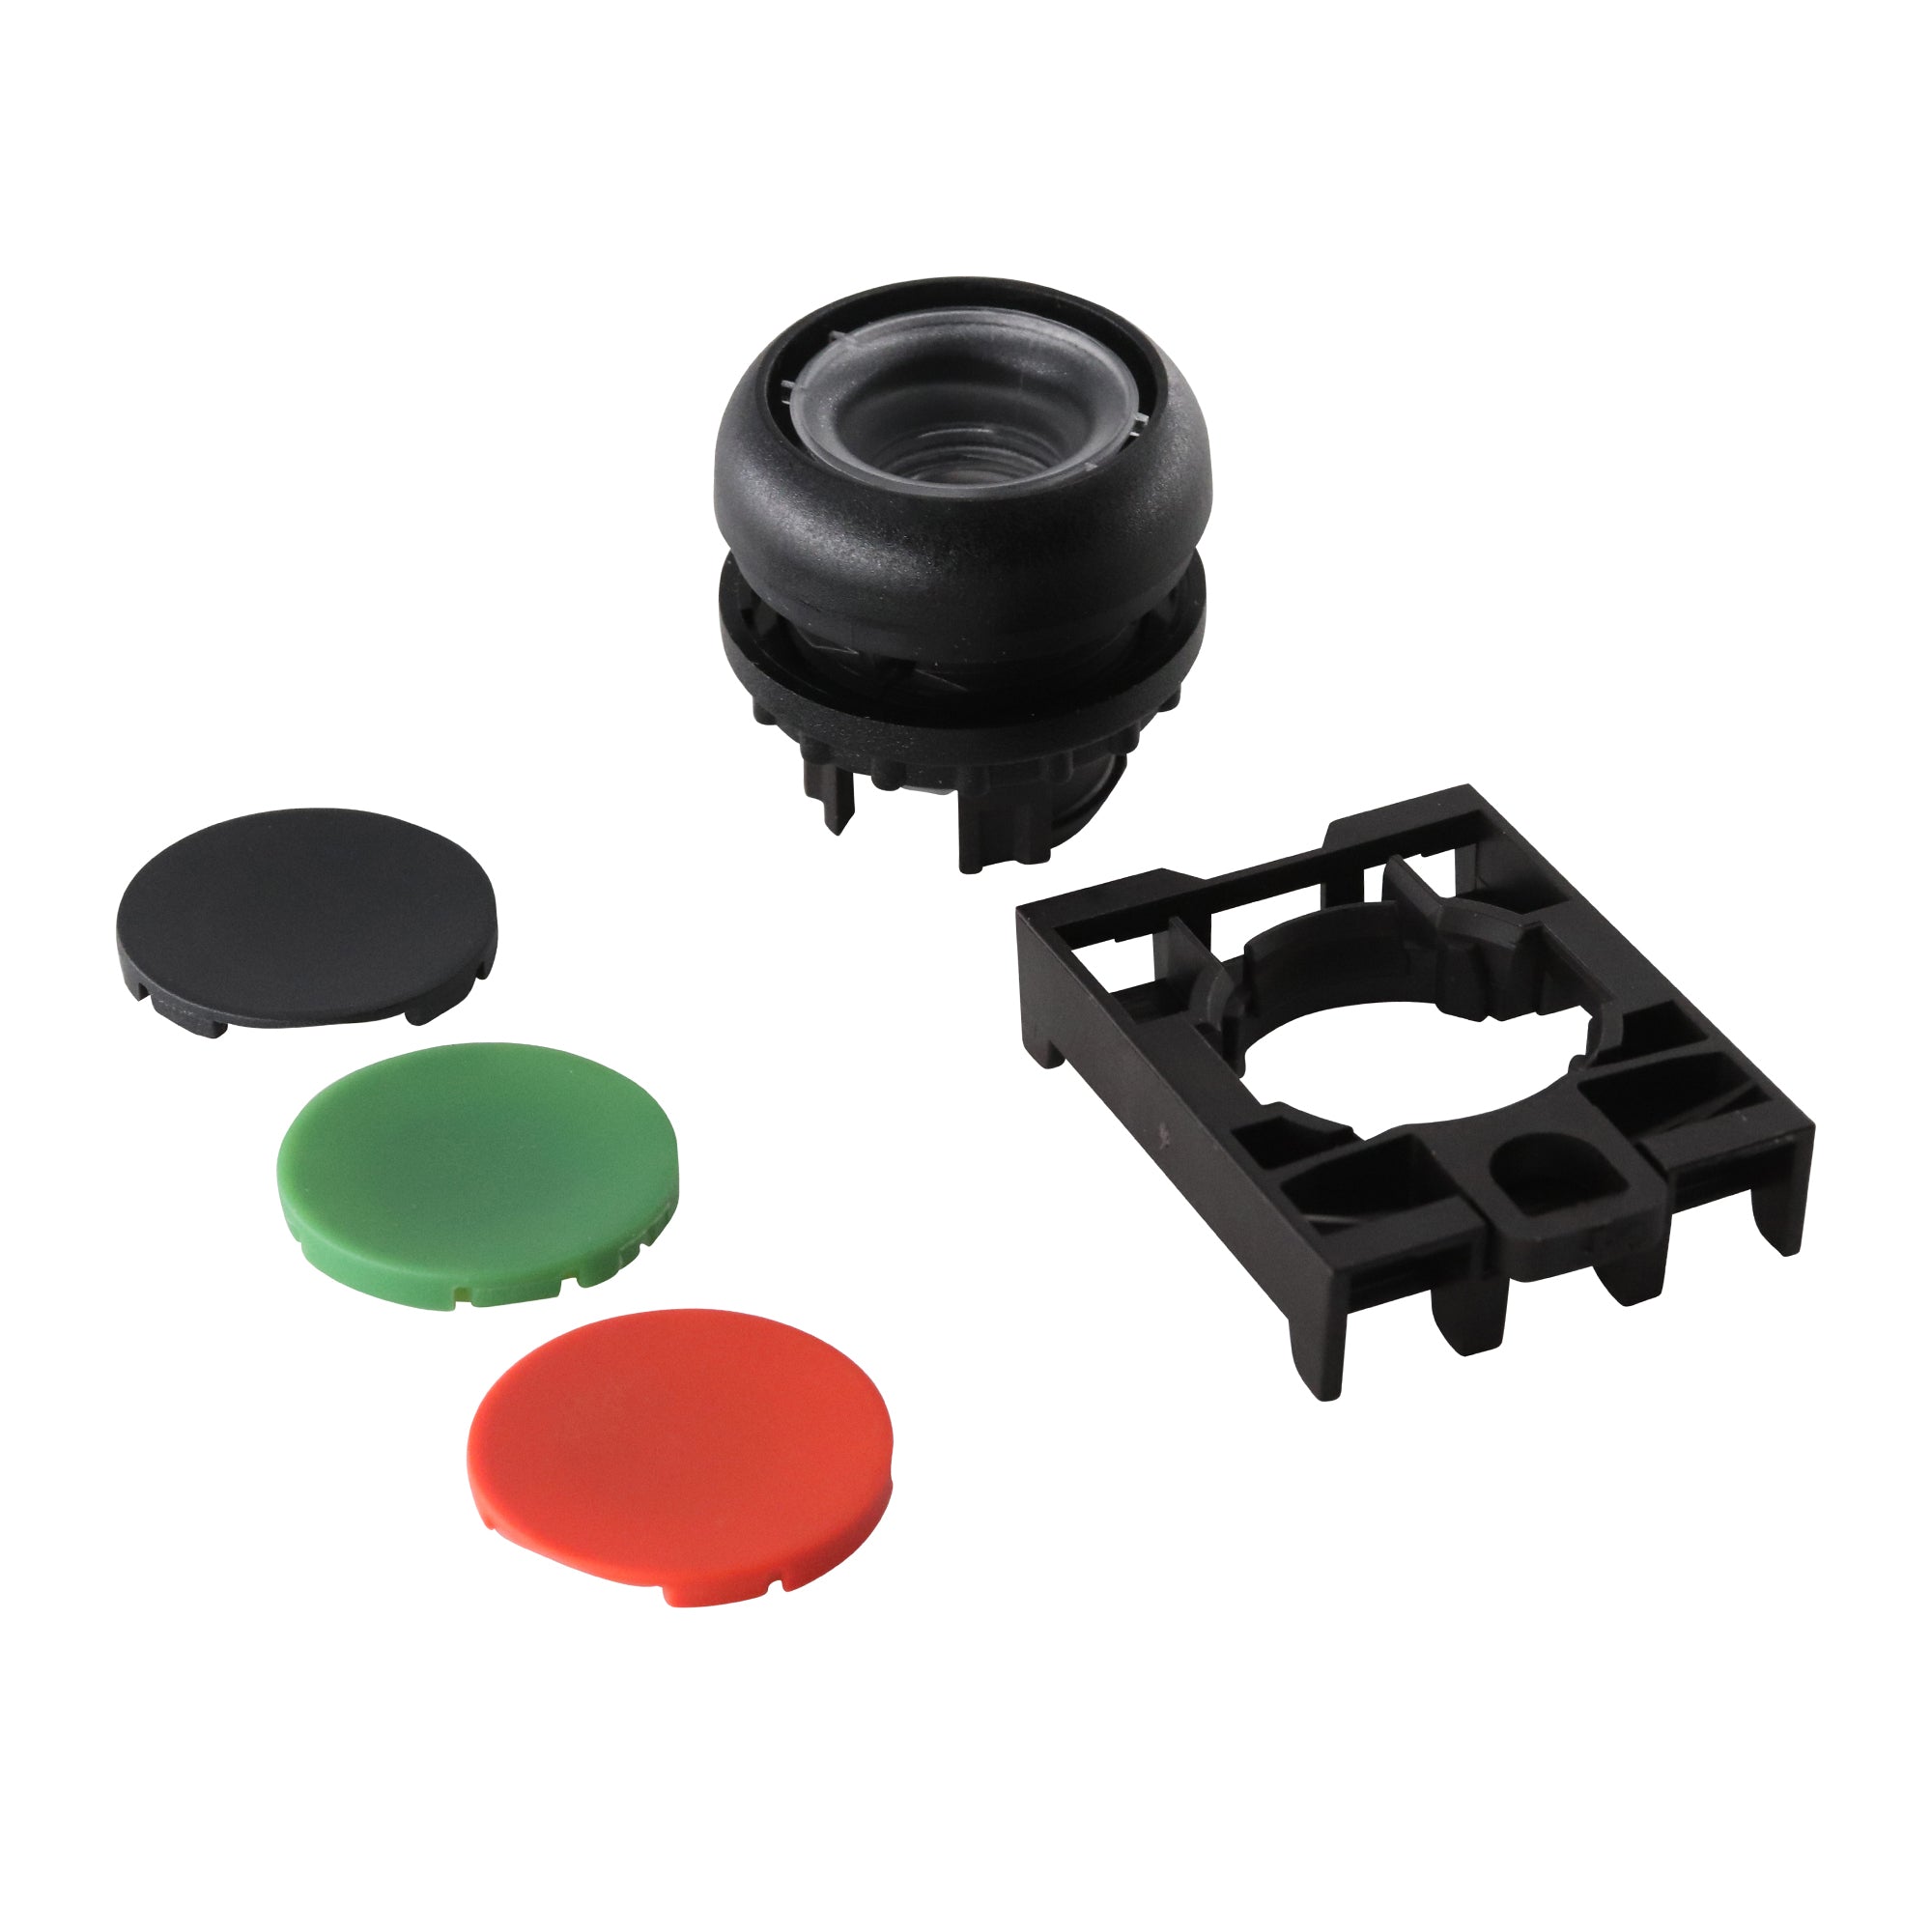 EATON, EATON M22S-D-X-SRG PUSH-BUTTON ACTUATOR, ON/OFF, FLUSH, 22MM, RED/BLACK/GREEN